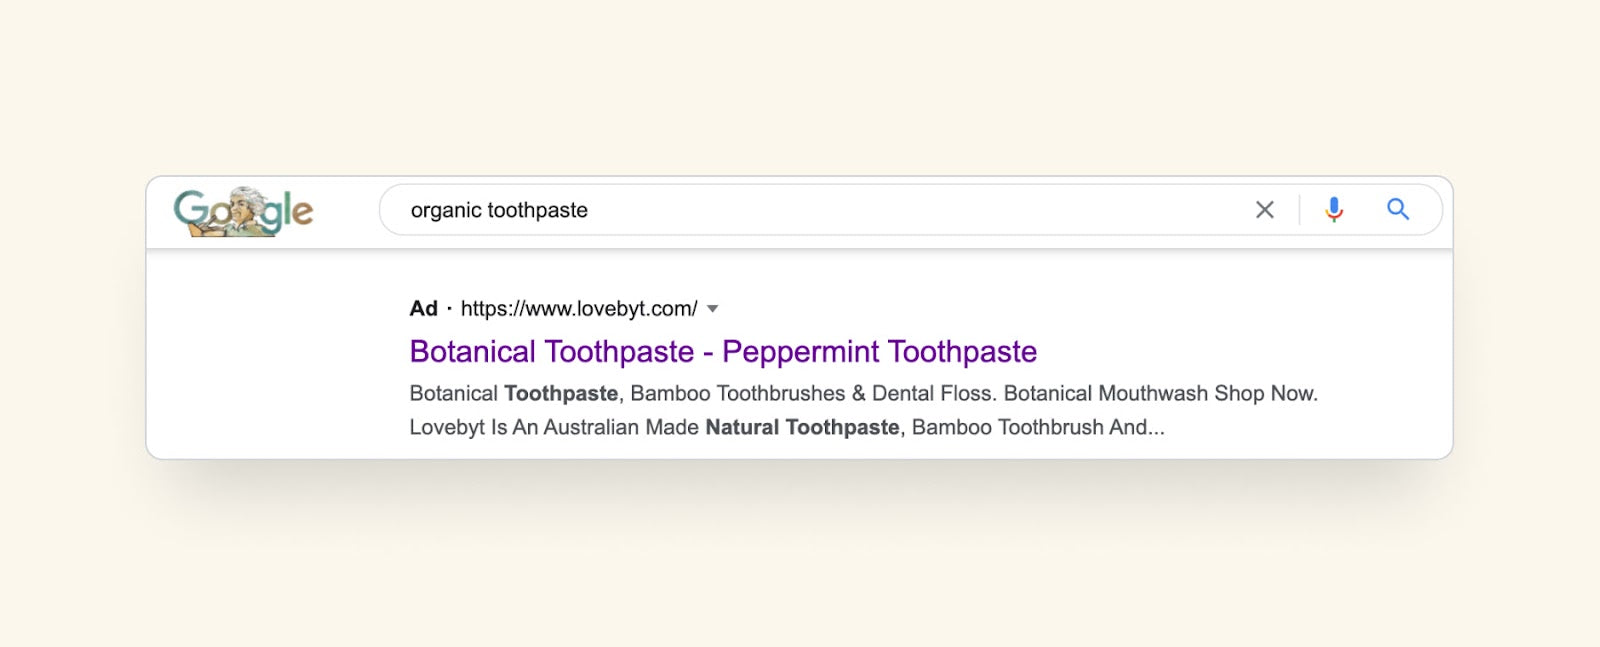 Search results for the phrase “organic toothpaste” with LOVEBYT’s paid ad at the top.